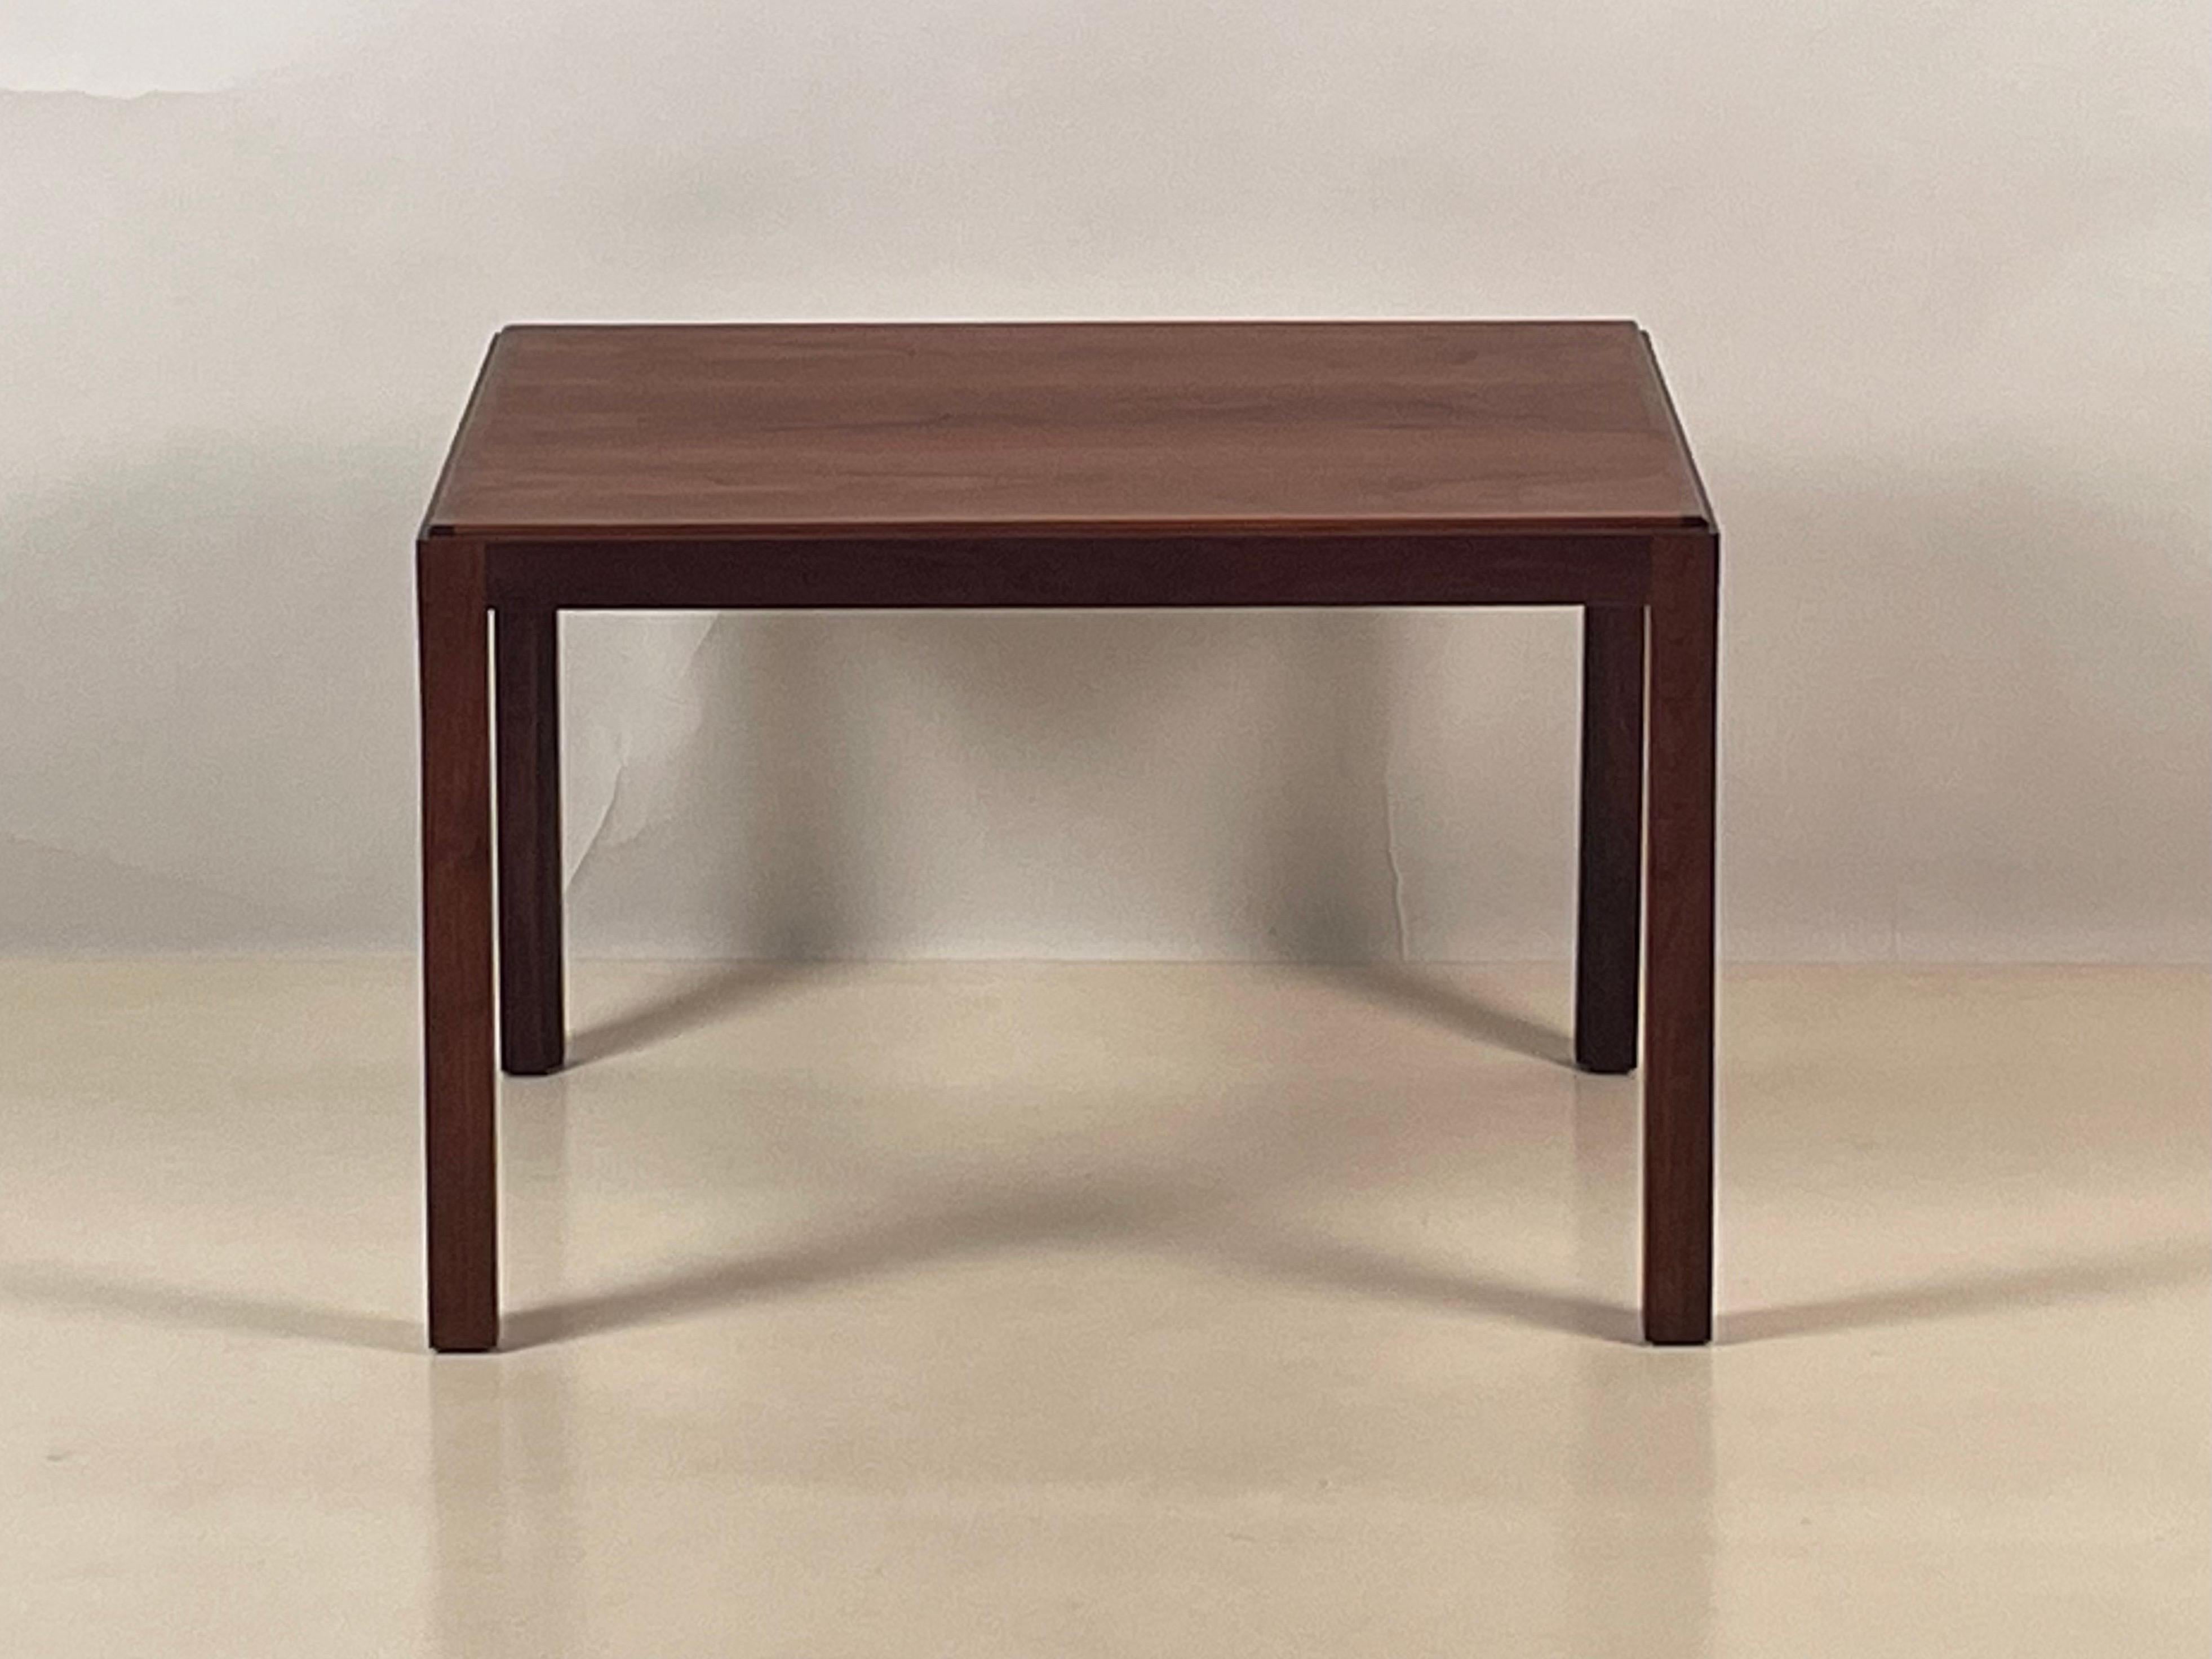 Pair of chic understated polished walnut end /side tables by Brown Saltman.